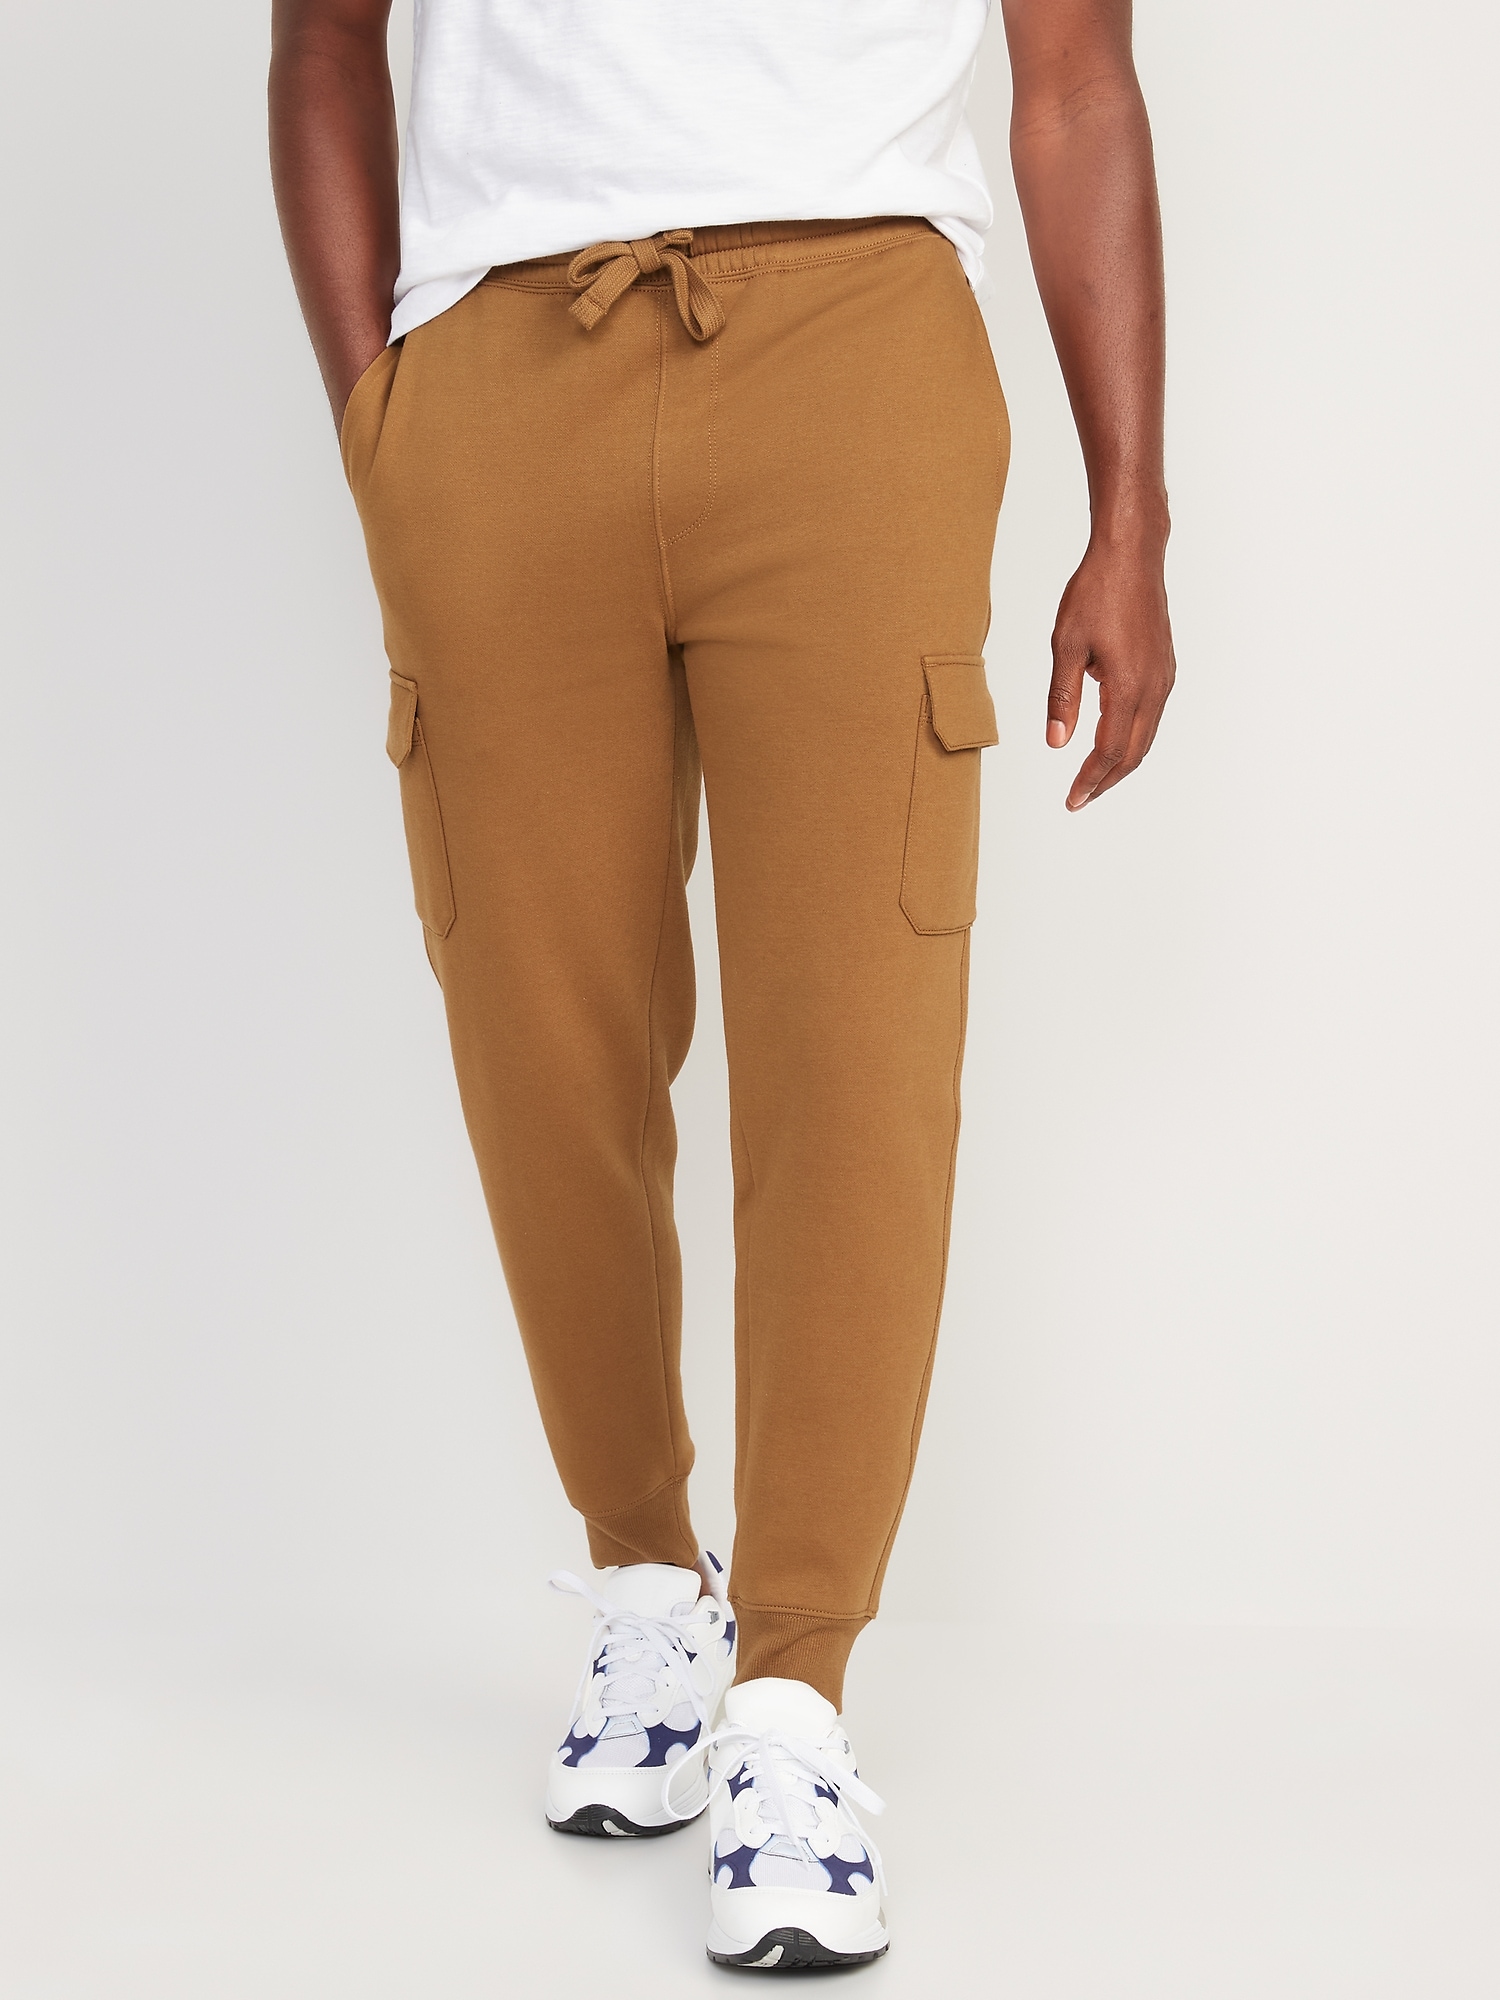 Old Navy Cargo Jogger Sweatpants brown. 1